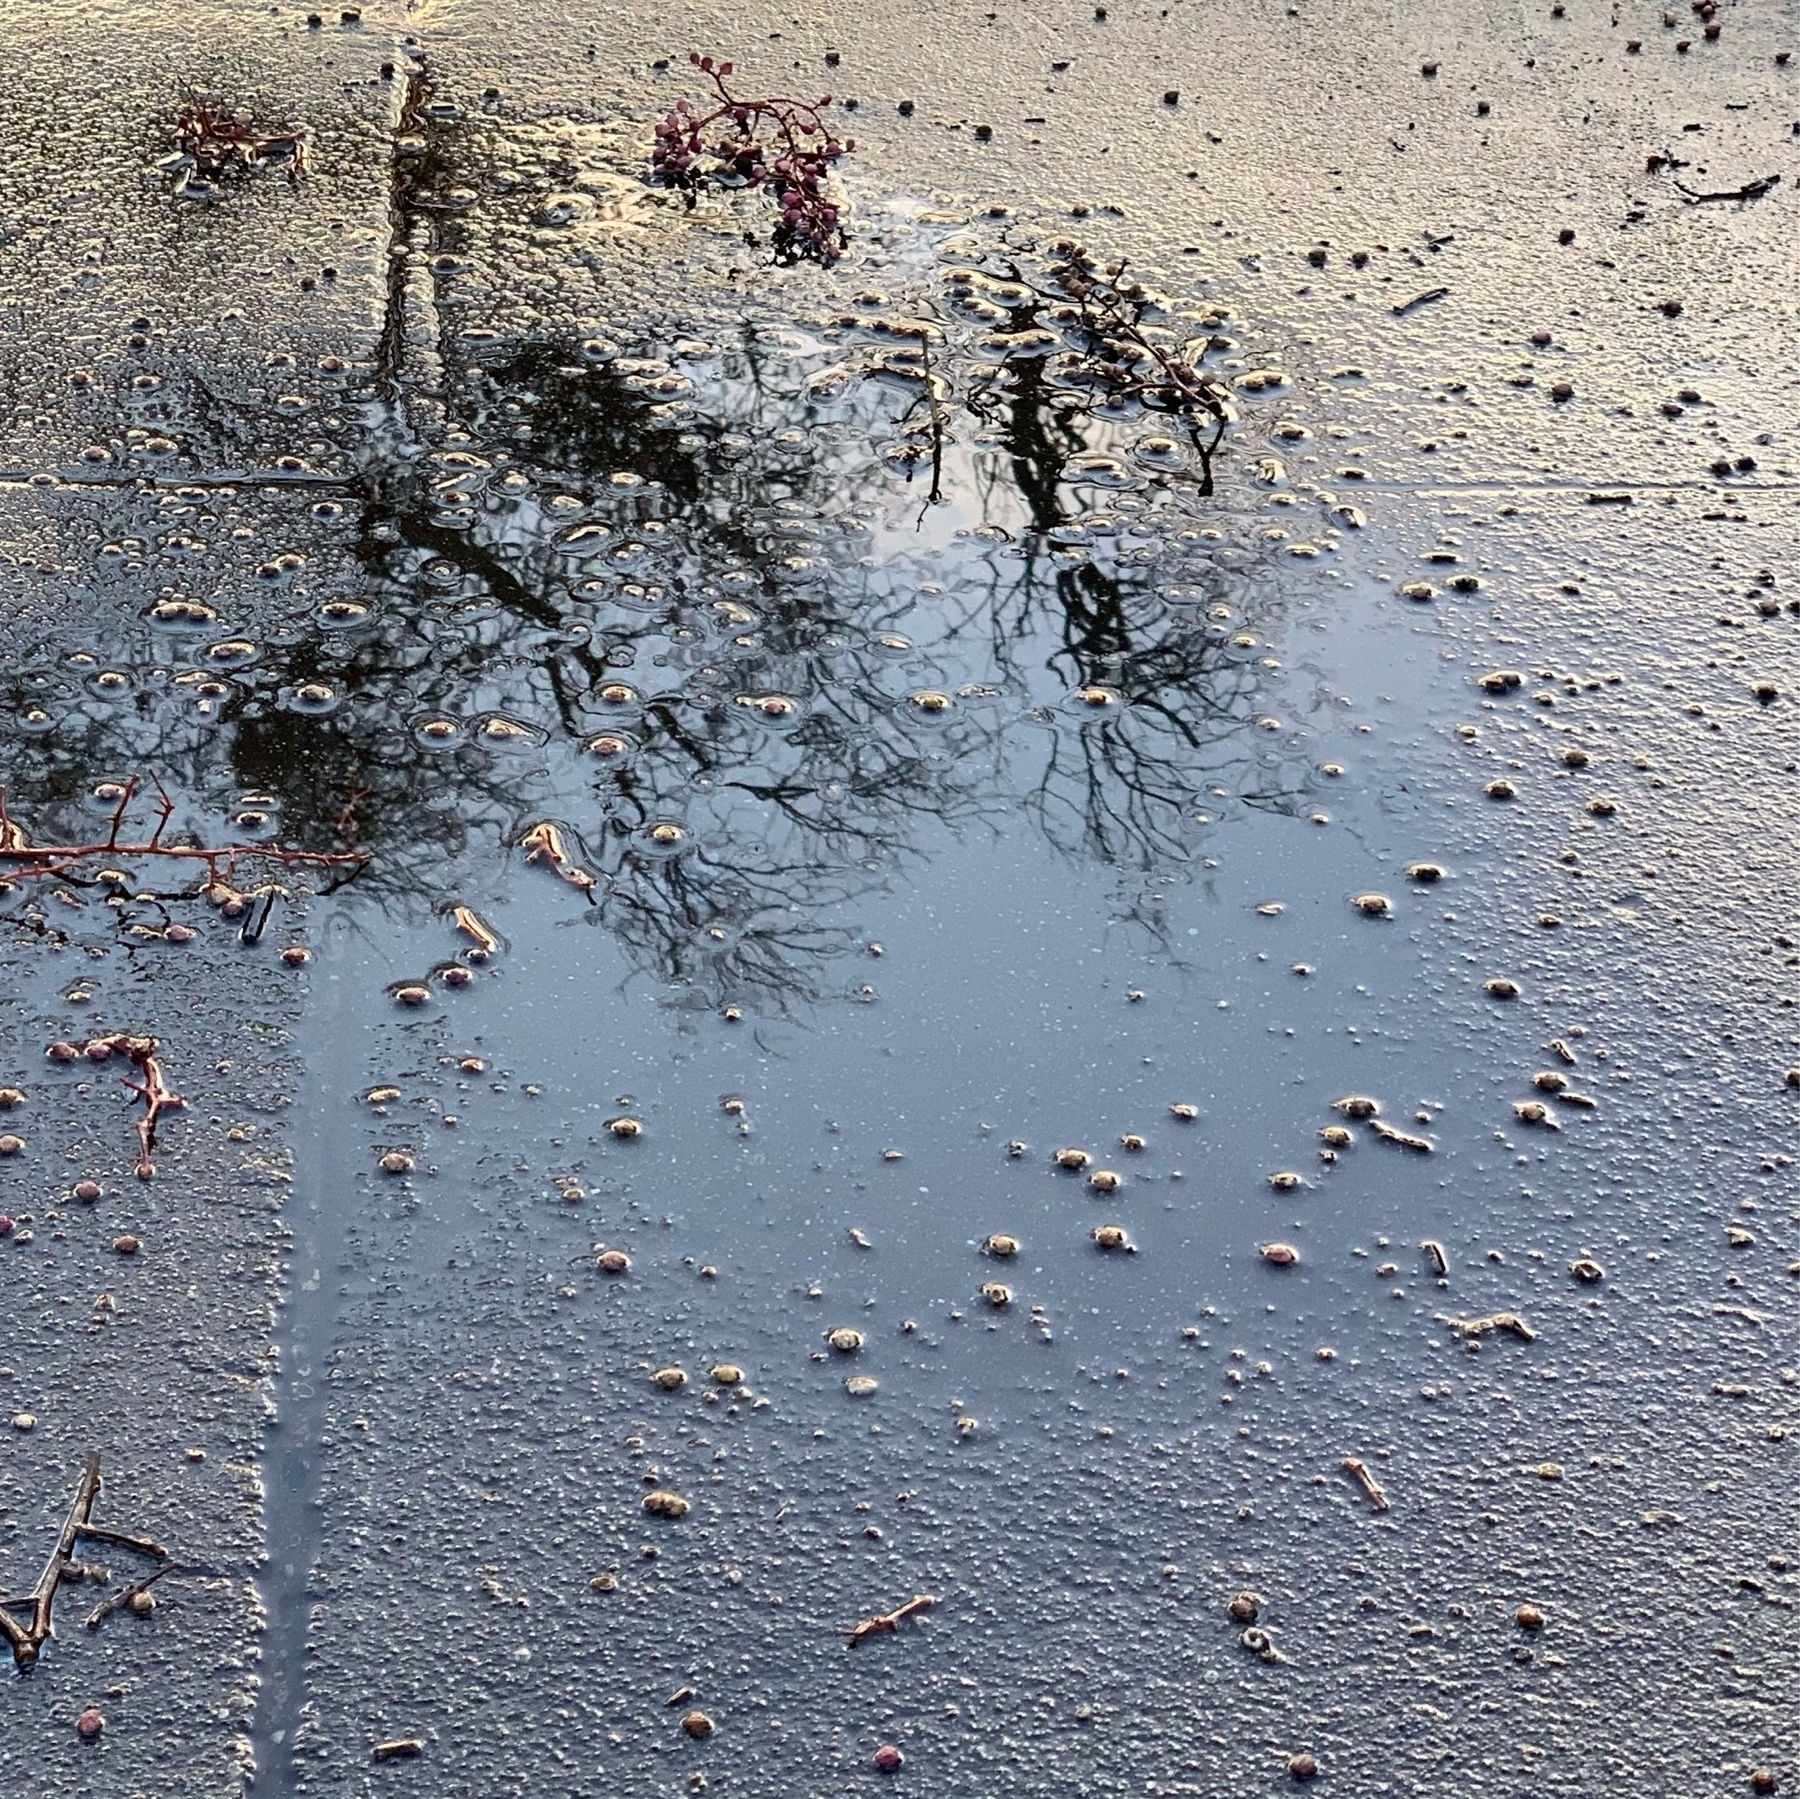 reflection of trees in a sidewalk puddle